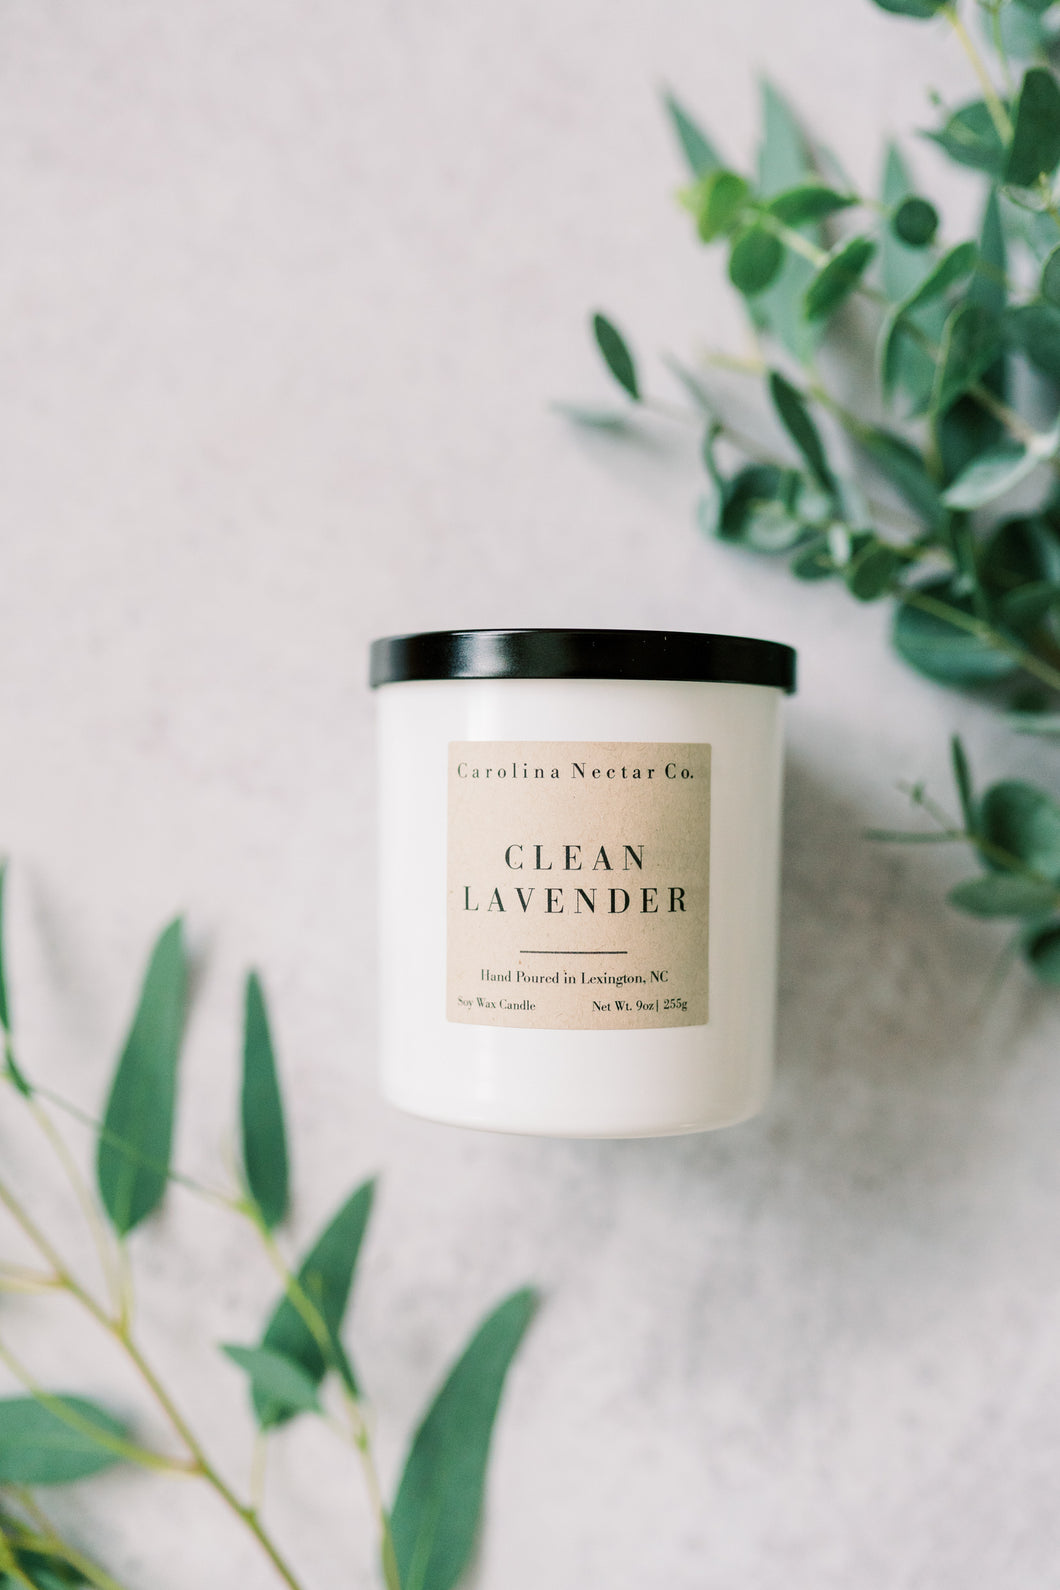 clean lavender soy candle in white glass jar with black metal top